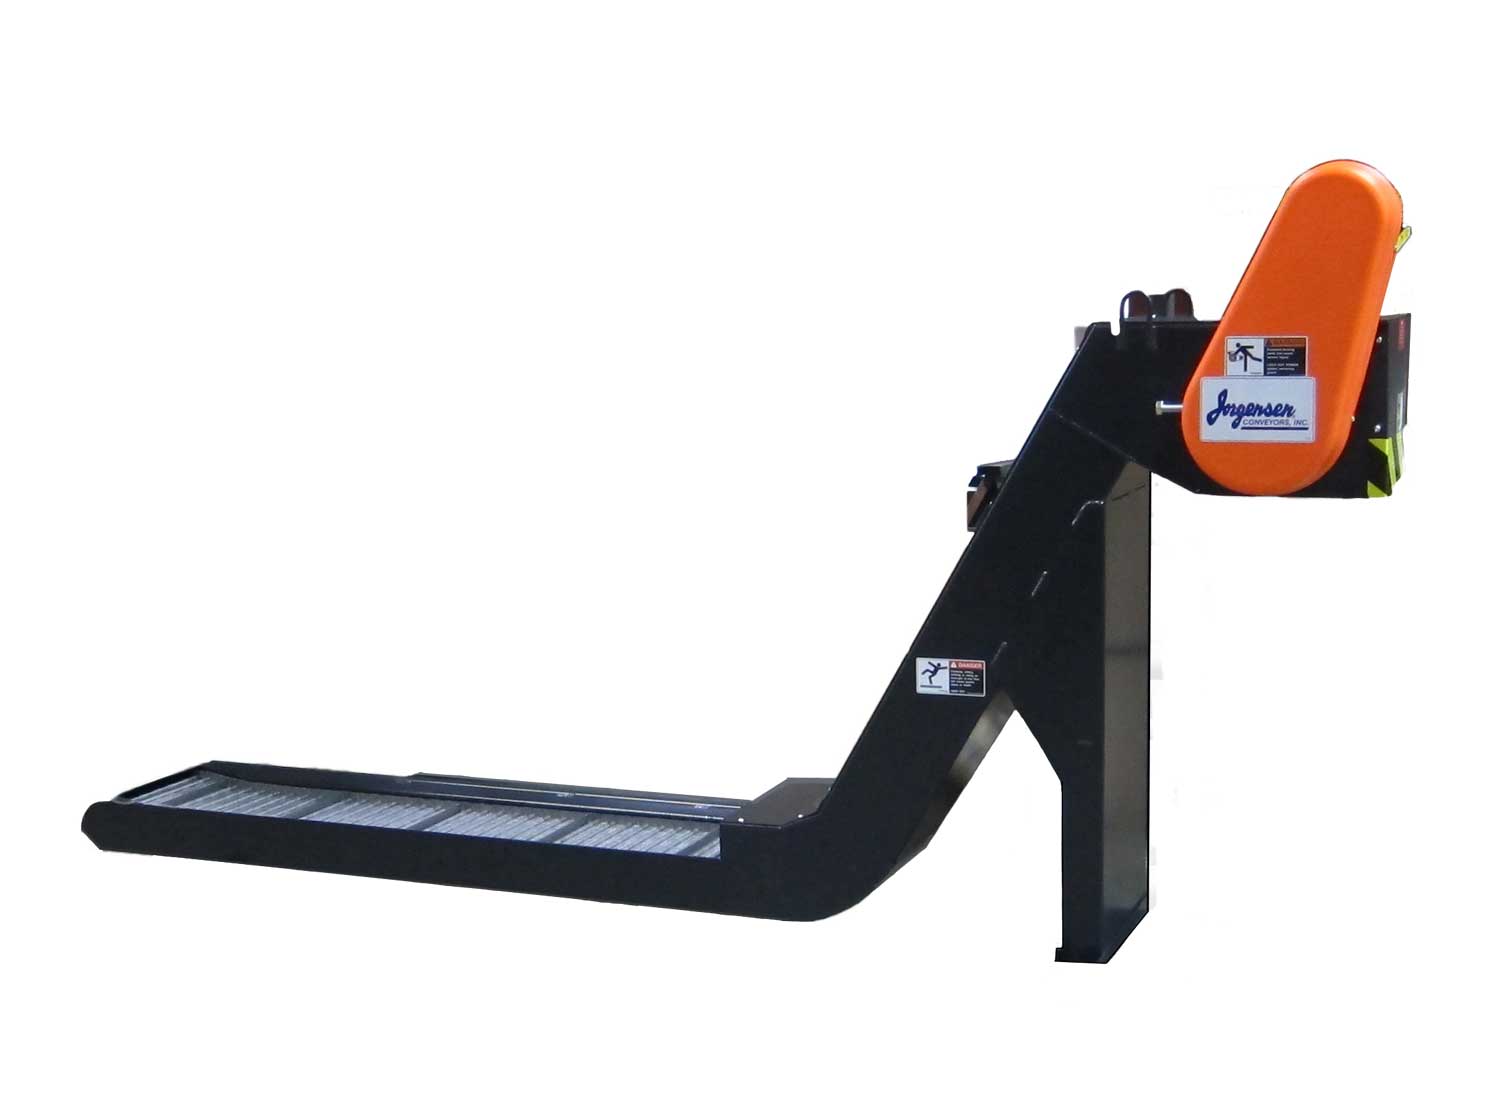 Hinged belt conveyor for cnc chip processing